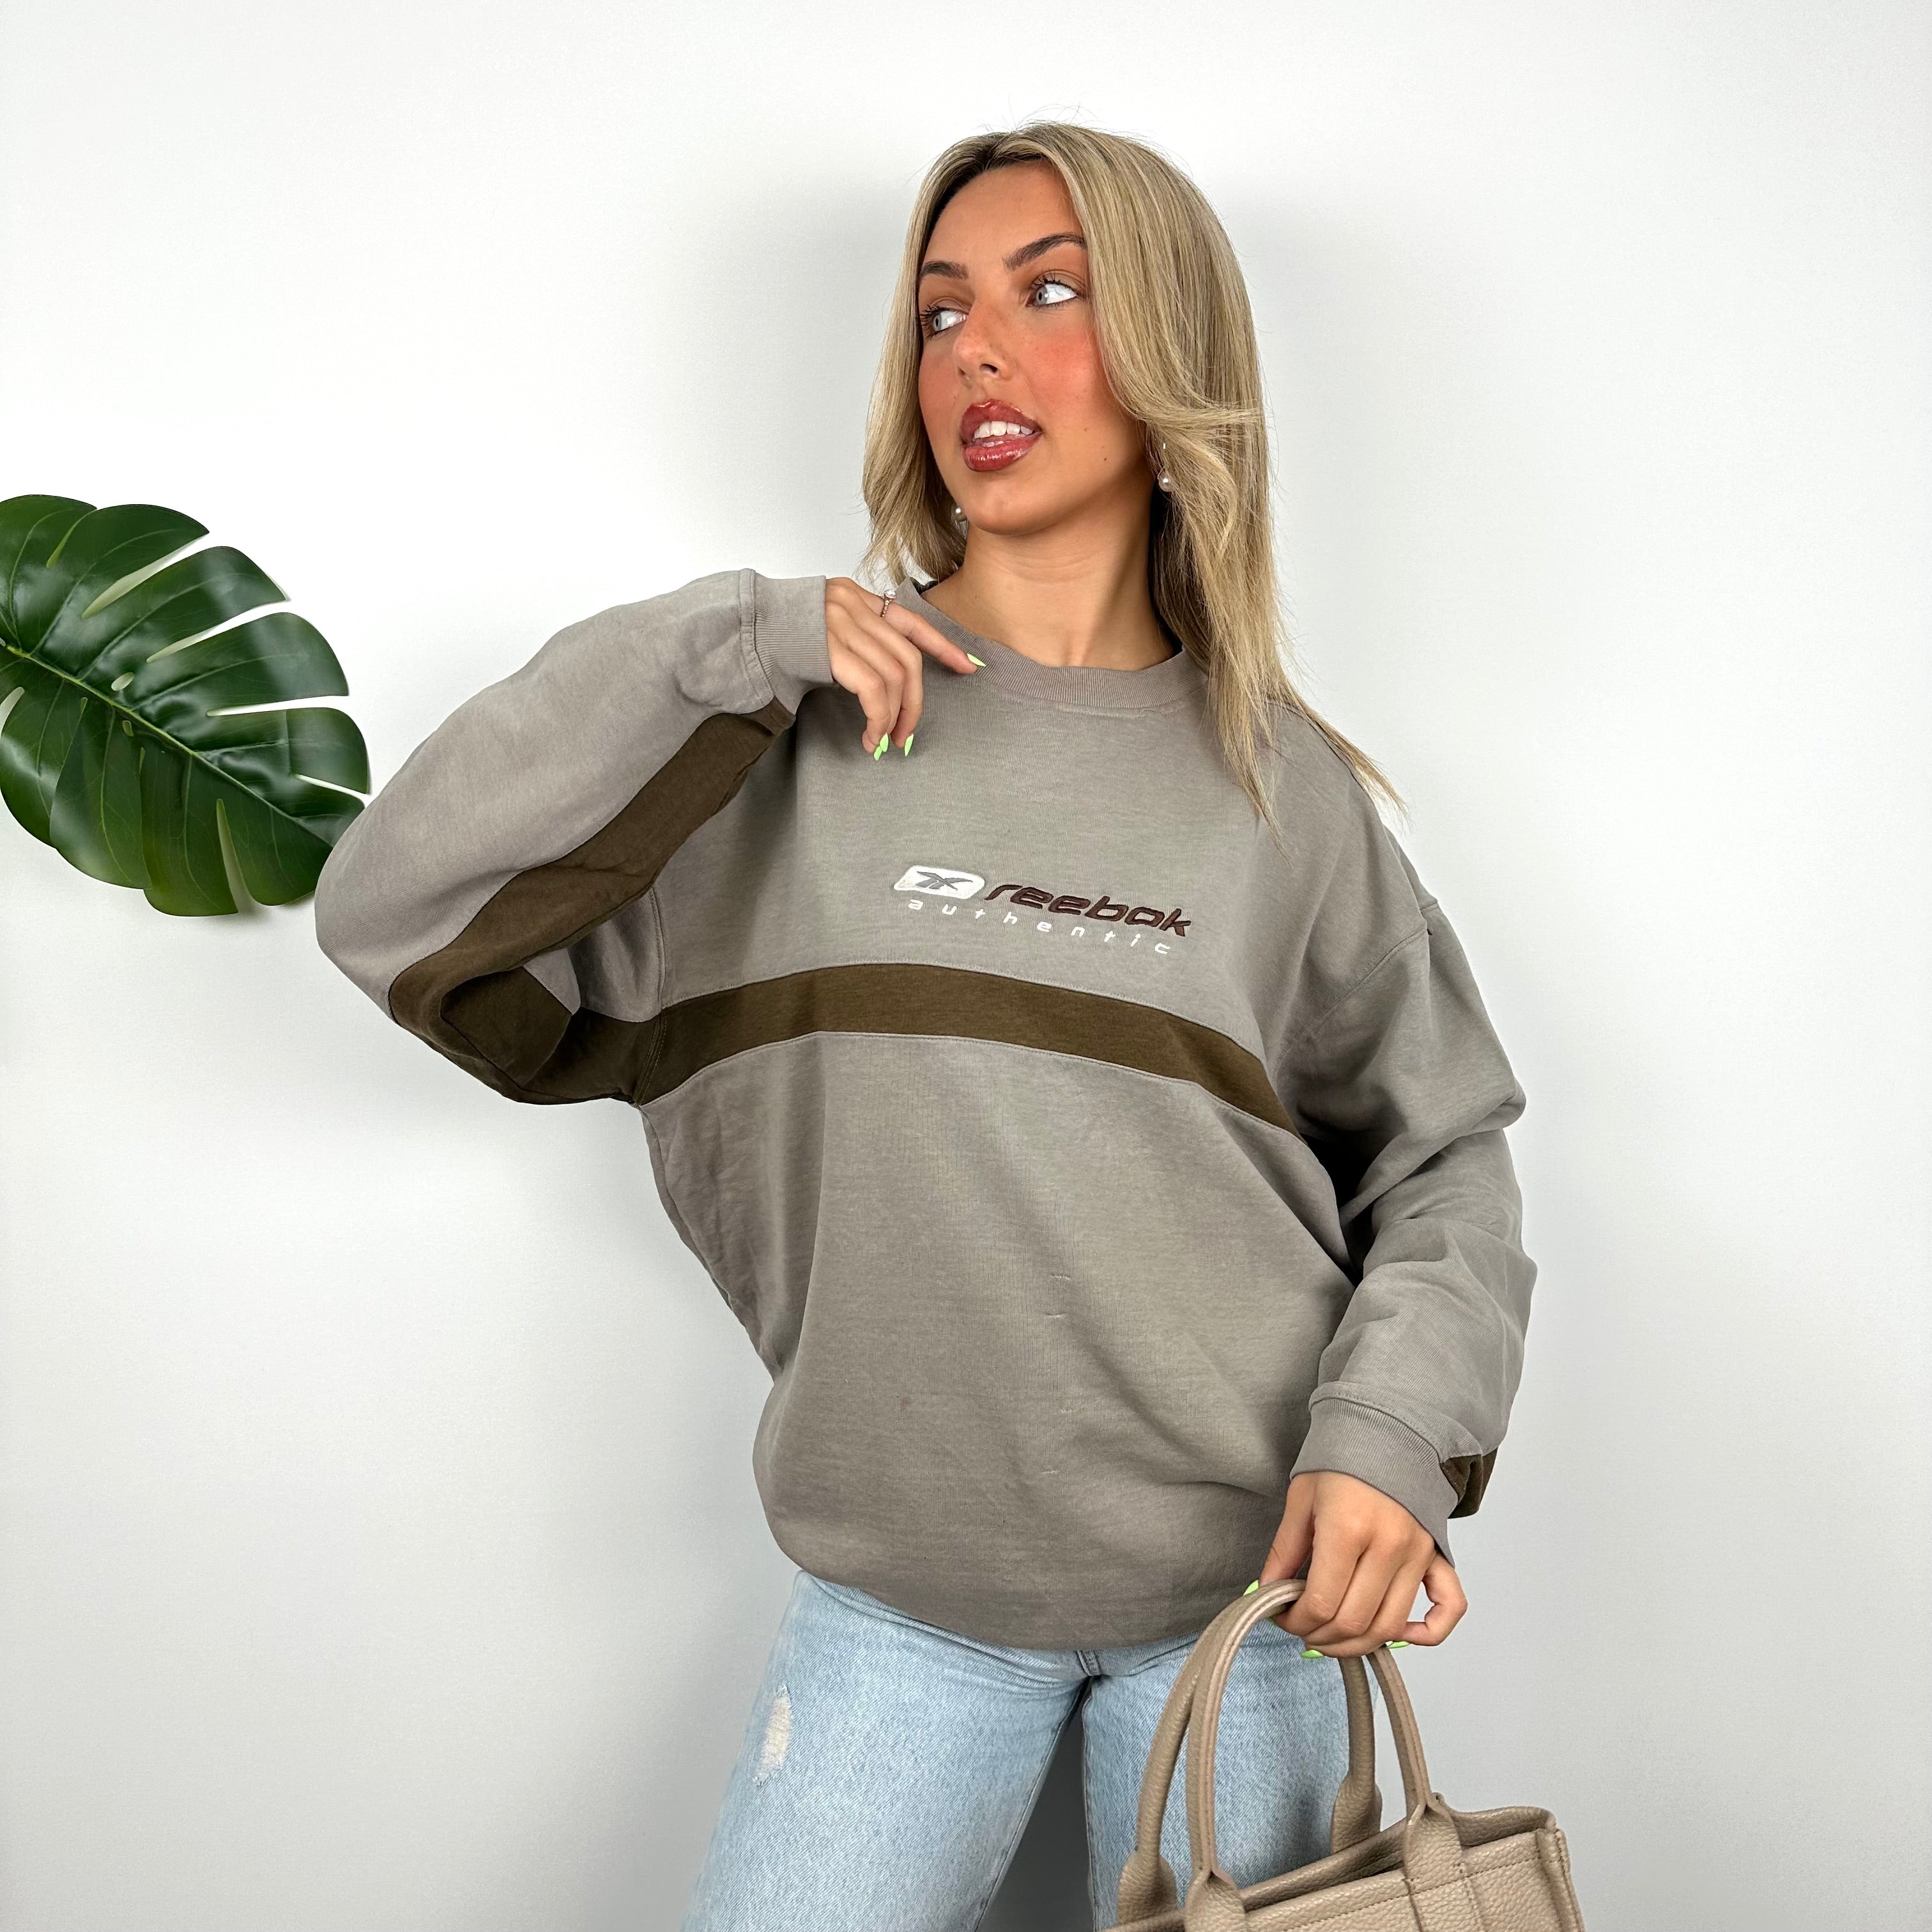 Reebok Brown Embroidered Spell Out Sweatshirt (M)